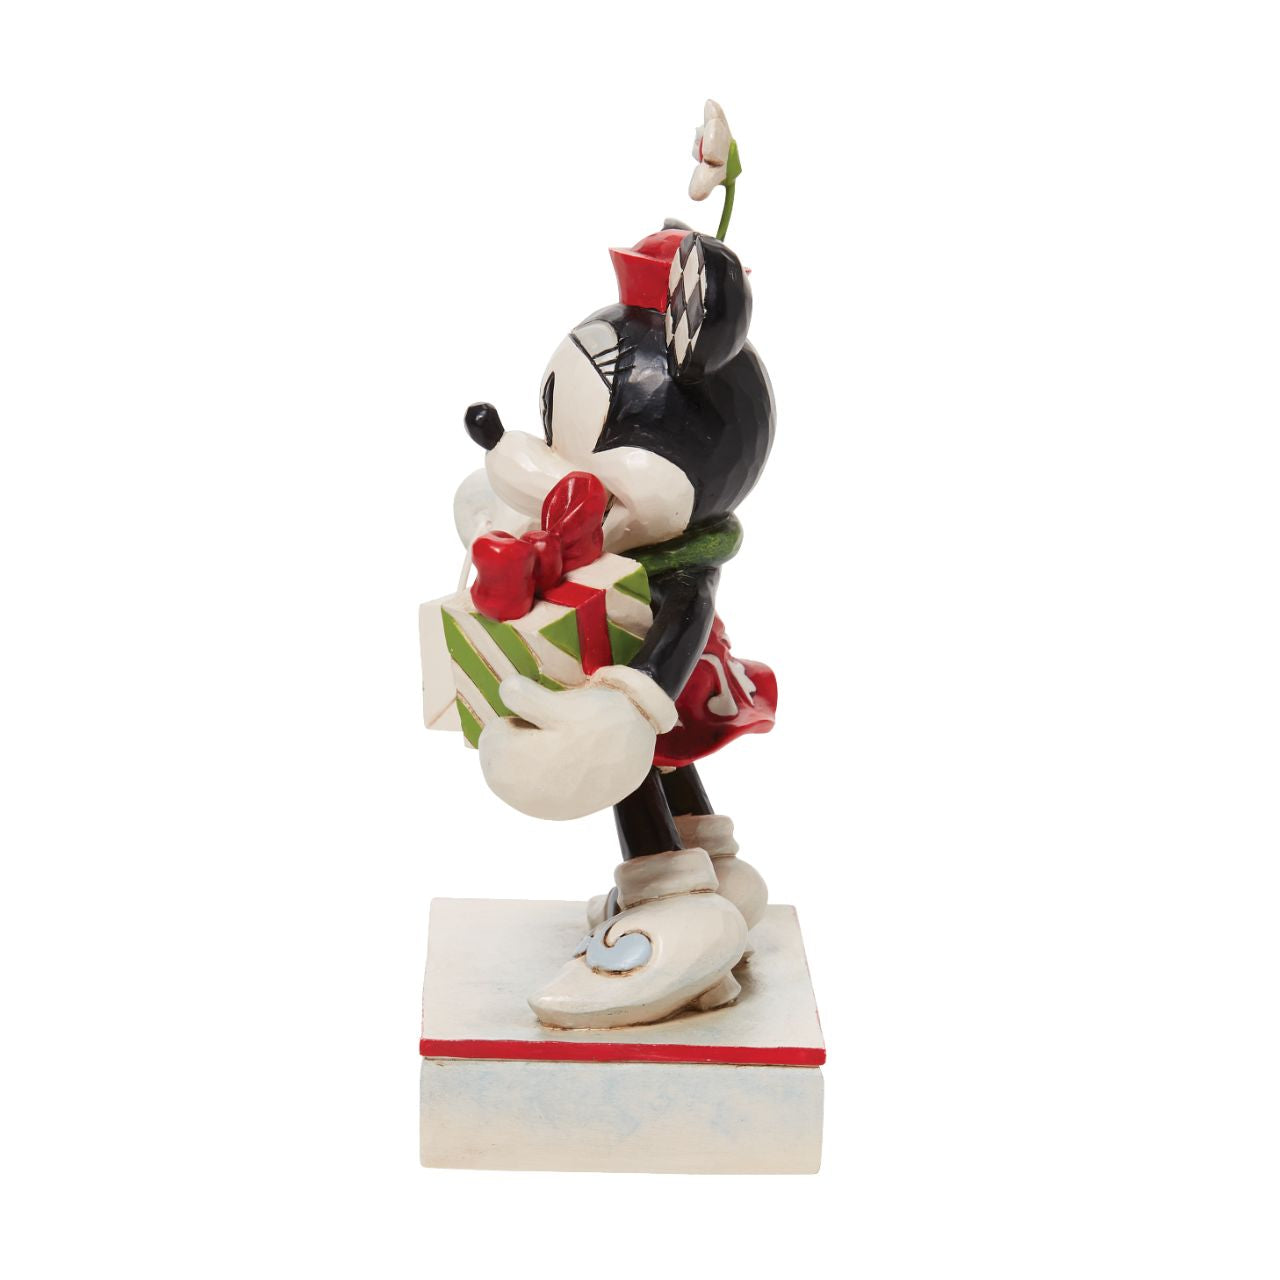 Jim Shore Christmas Mickey with Stack of Presents Figurine  Disney comes home for the holidays with this festive figurine by Jim Shore. Donning a candy cane striped scarf, Mickey wears a neighborly smile as he carries a towering stack of presents. The cheerful mouse boasts a holly brimmed Santa hat.